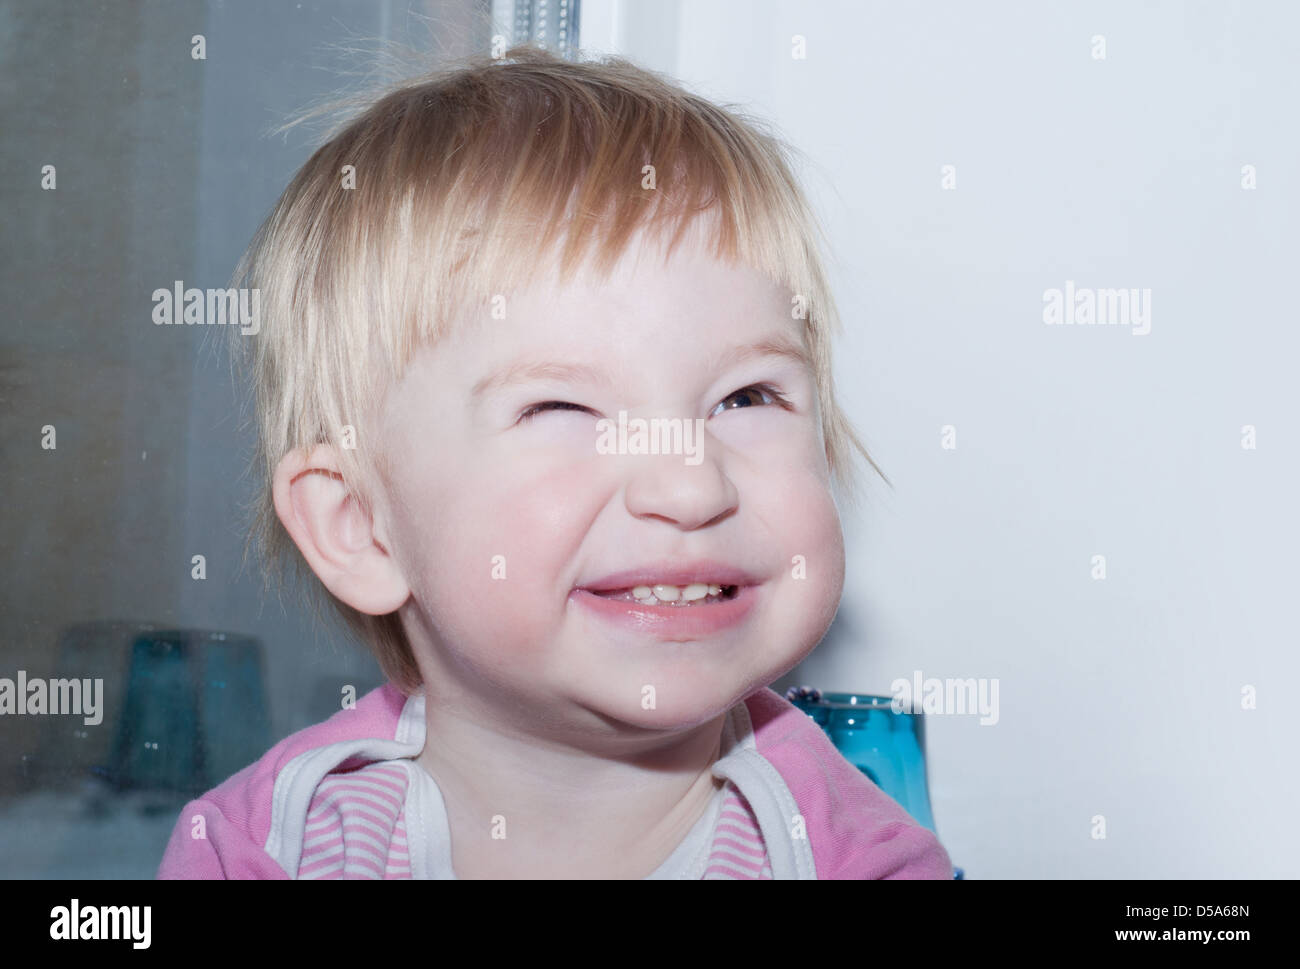 the small baby is standing near white wall and nice grimace Stock Photo